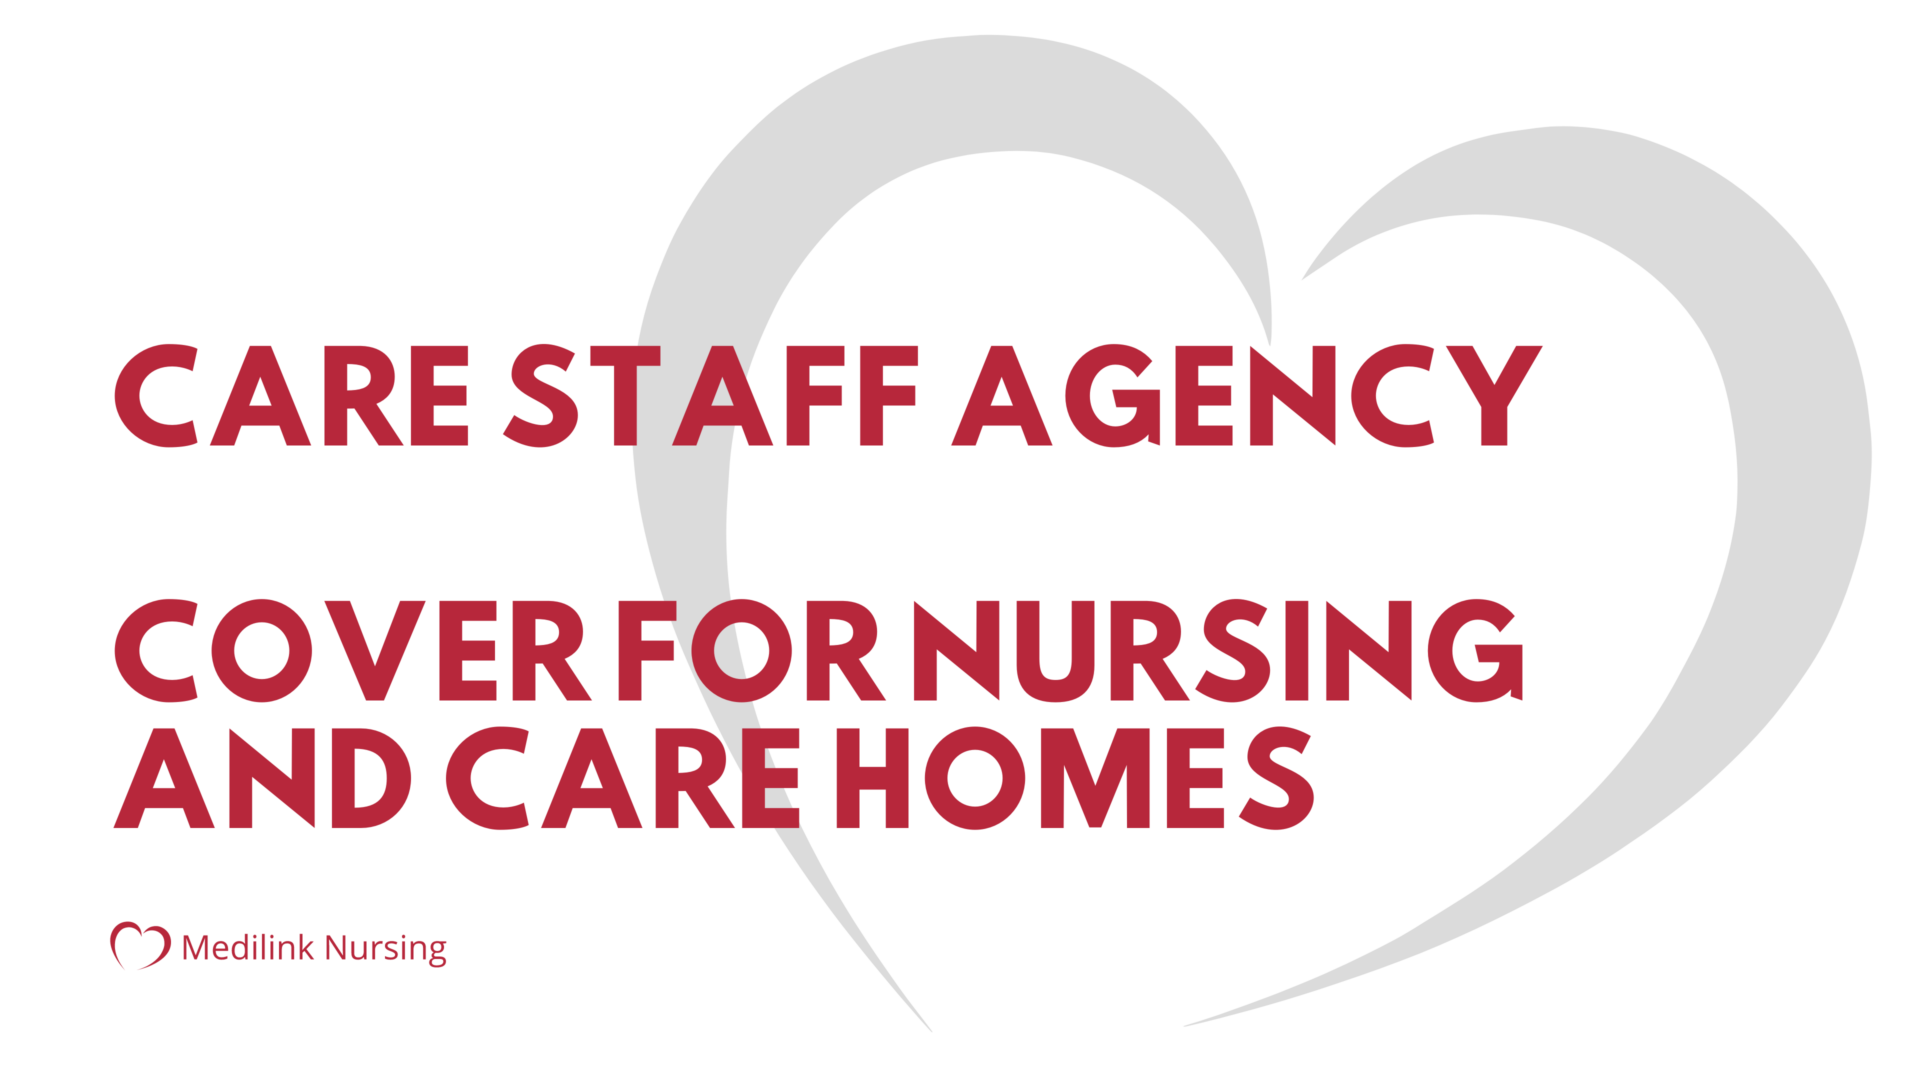 Reliable Care Staff Agency For Nursing and Care Homes